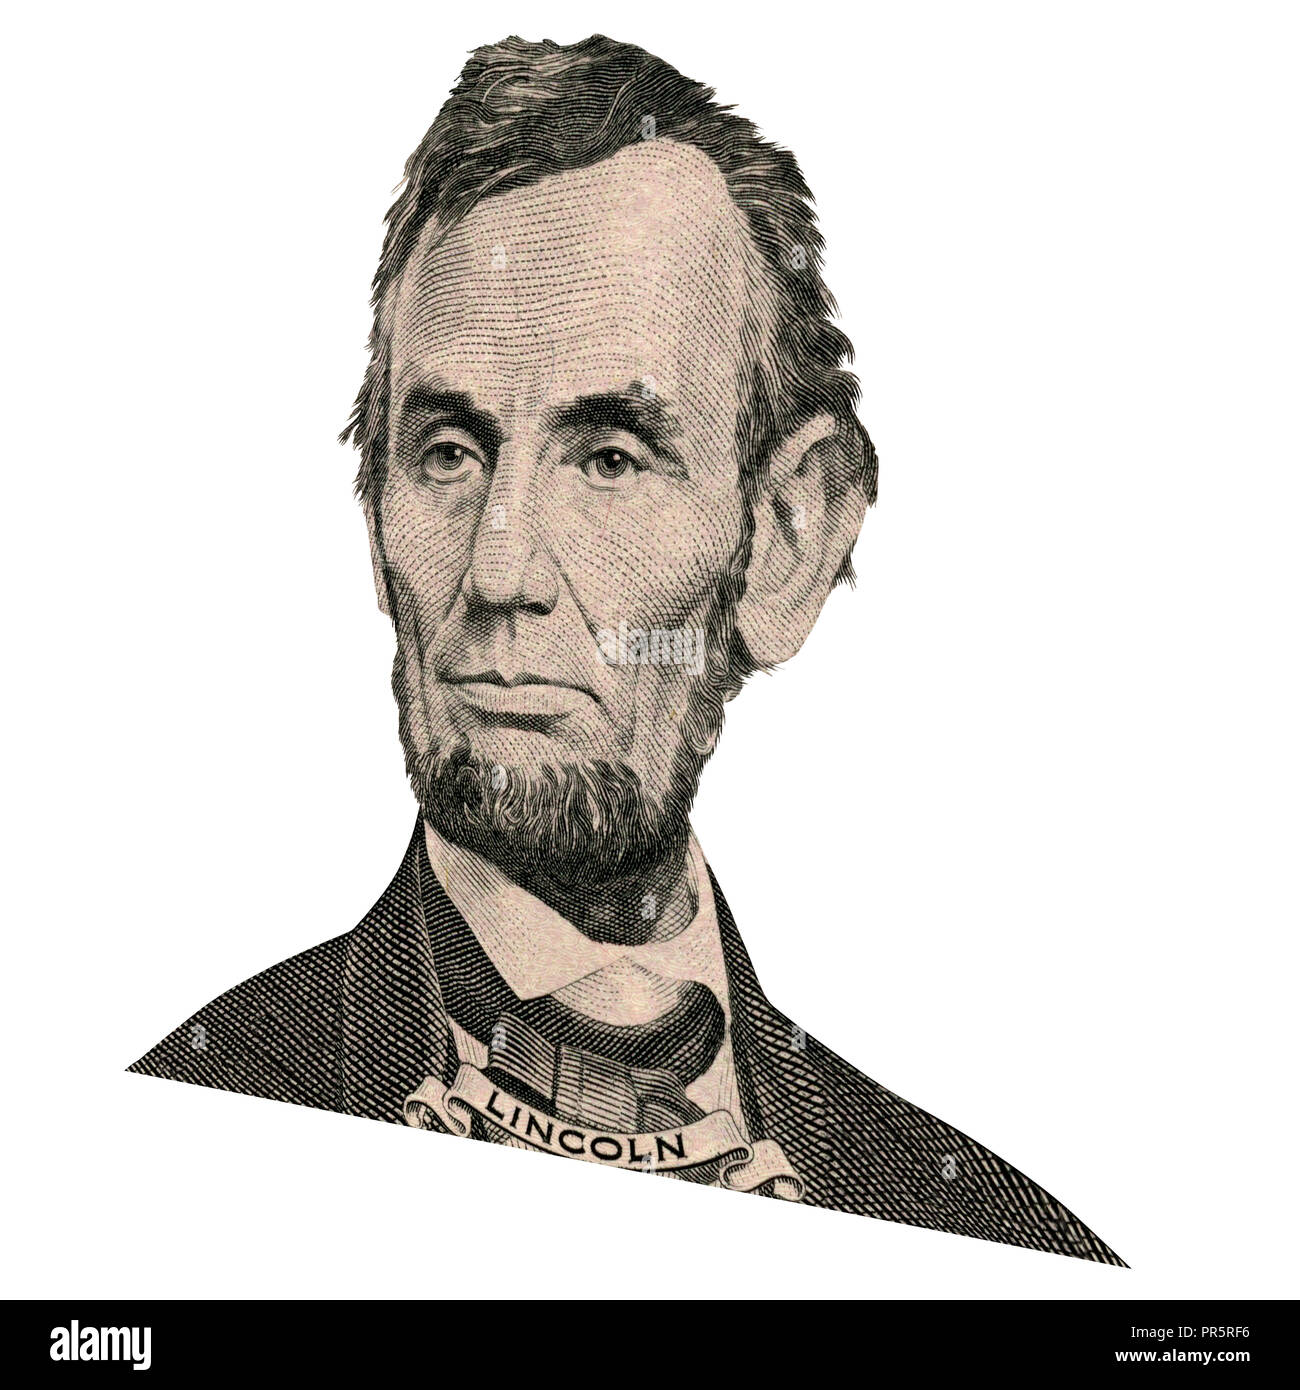 Portrait of former U.S. president Abraham Lincoln as he looks on five dollar bill obverse. Photo at an angle of 15 degrees. Stock Photo